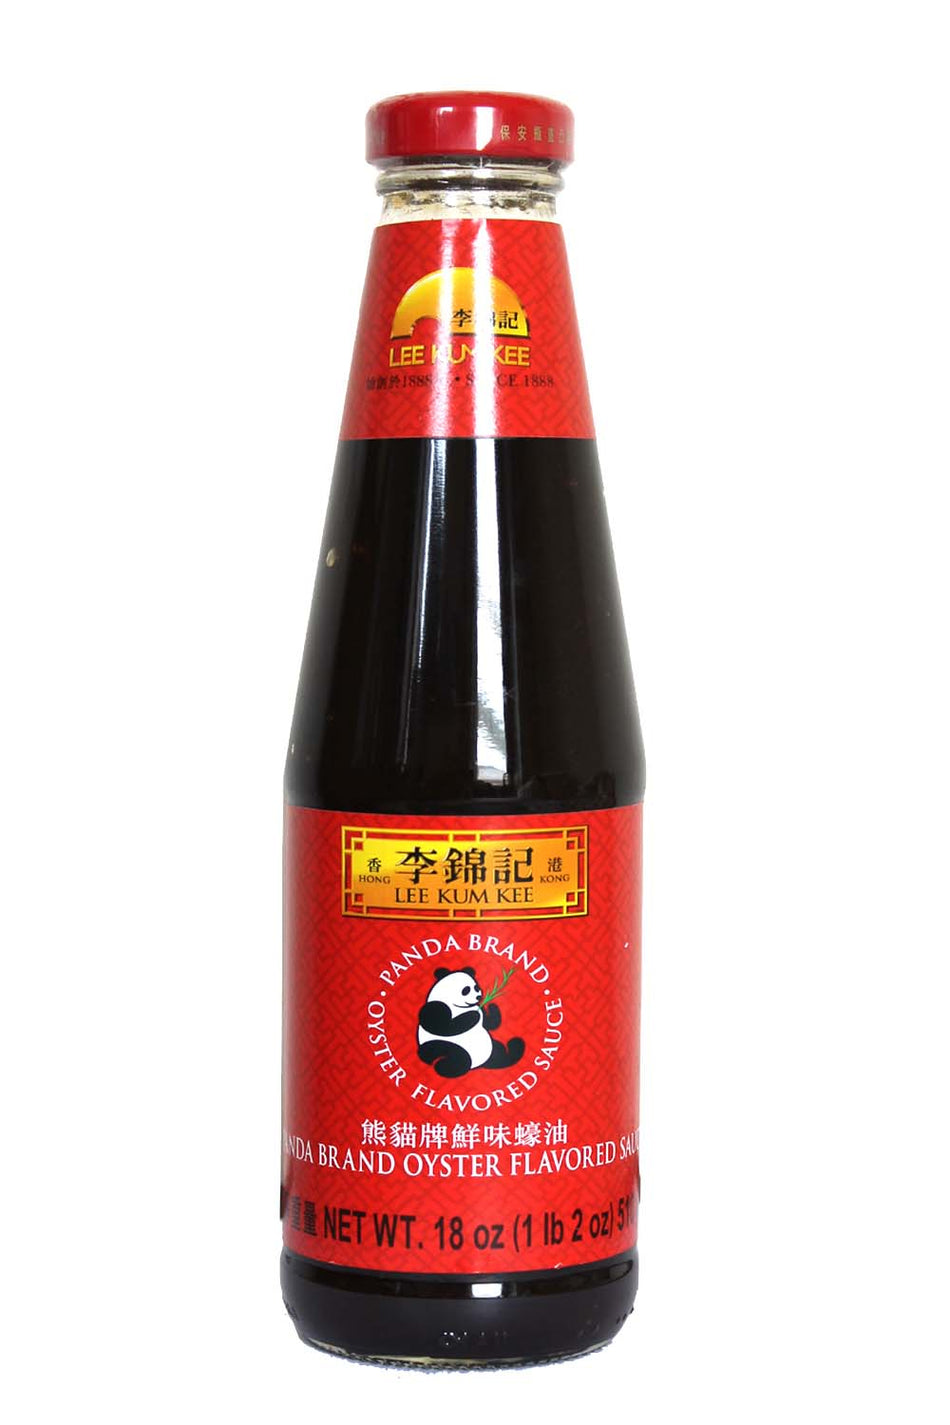 Panda Brand Oyster Flavored Sauce